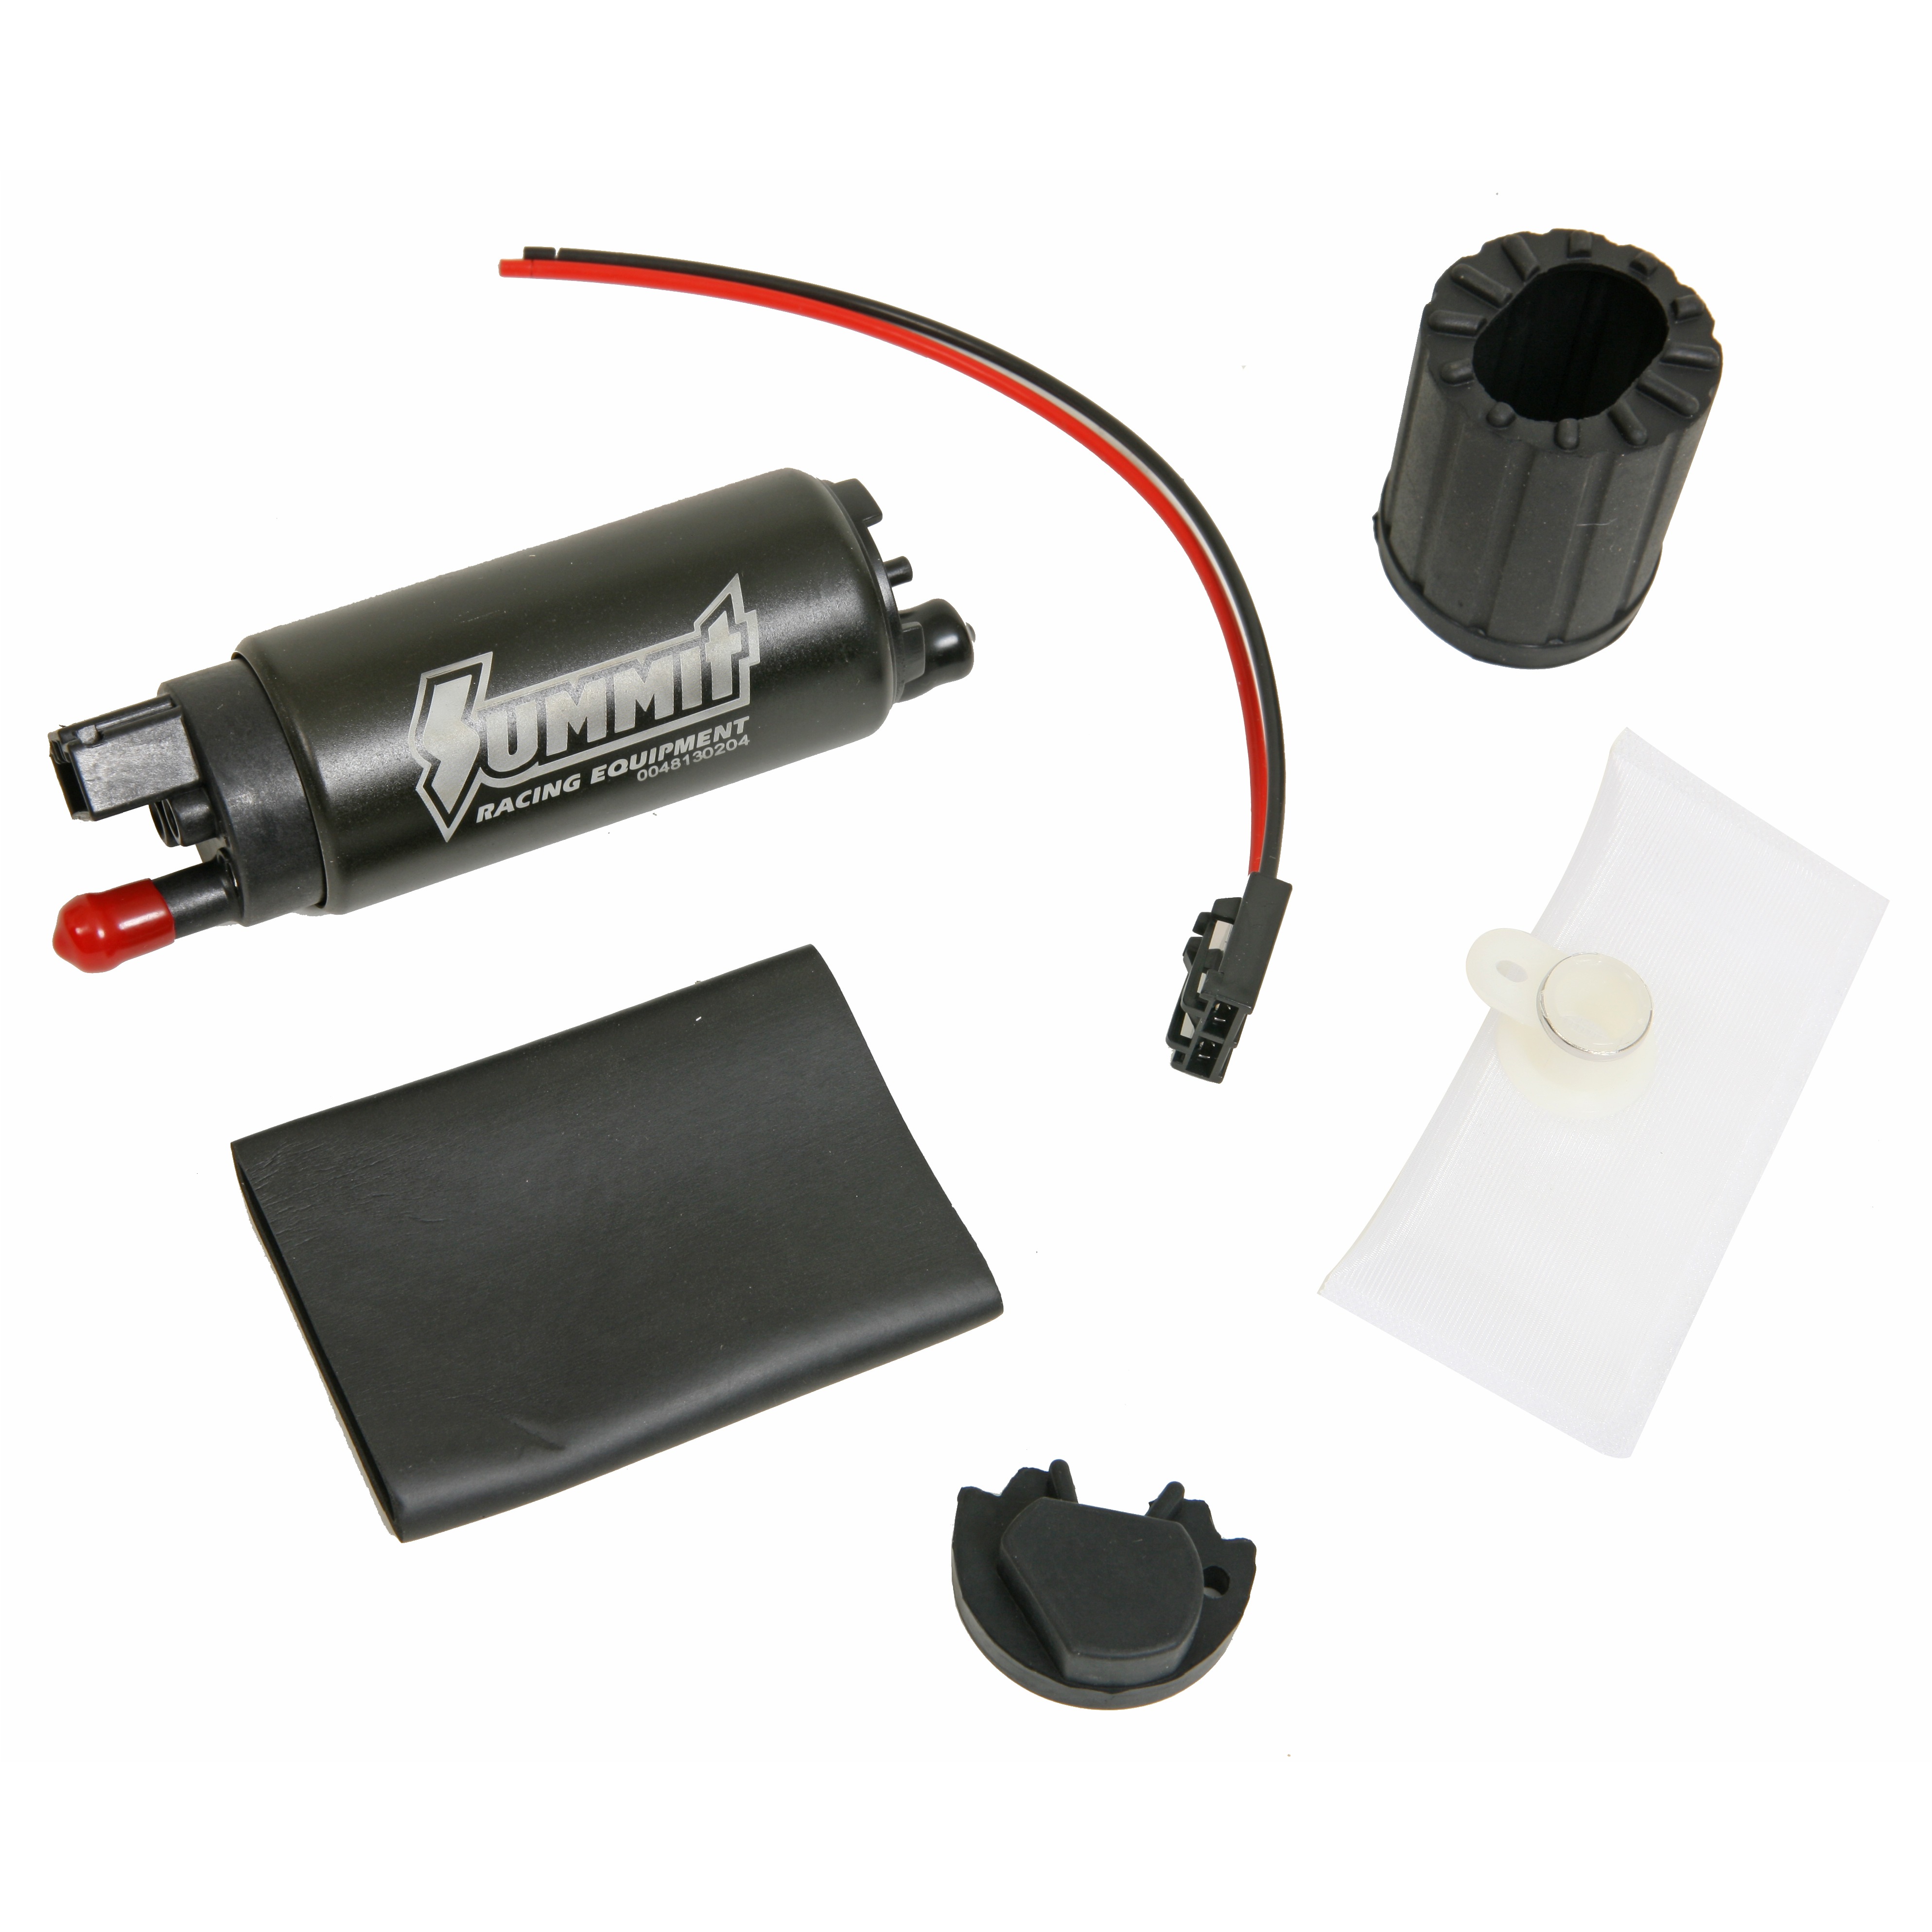 Summit Racing In-Tank Electric Fuel Pump, 320 lph for Gasoline